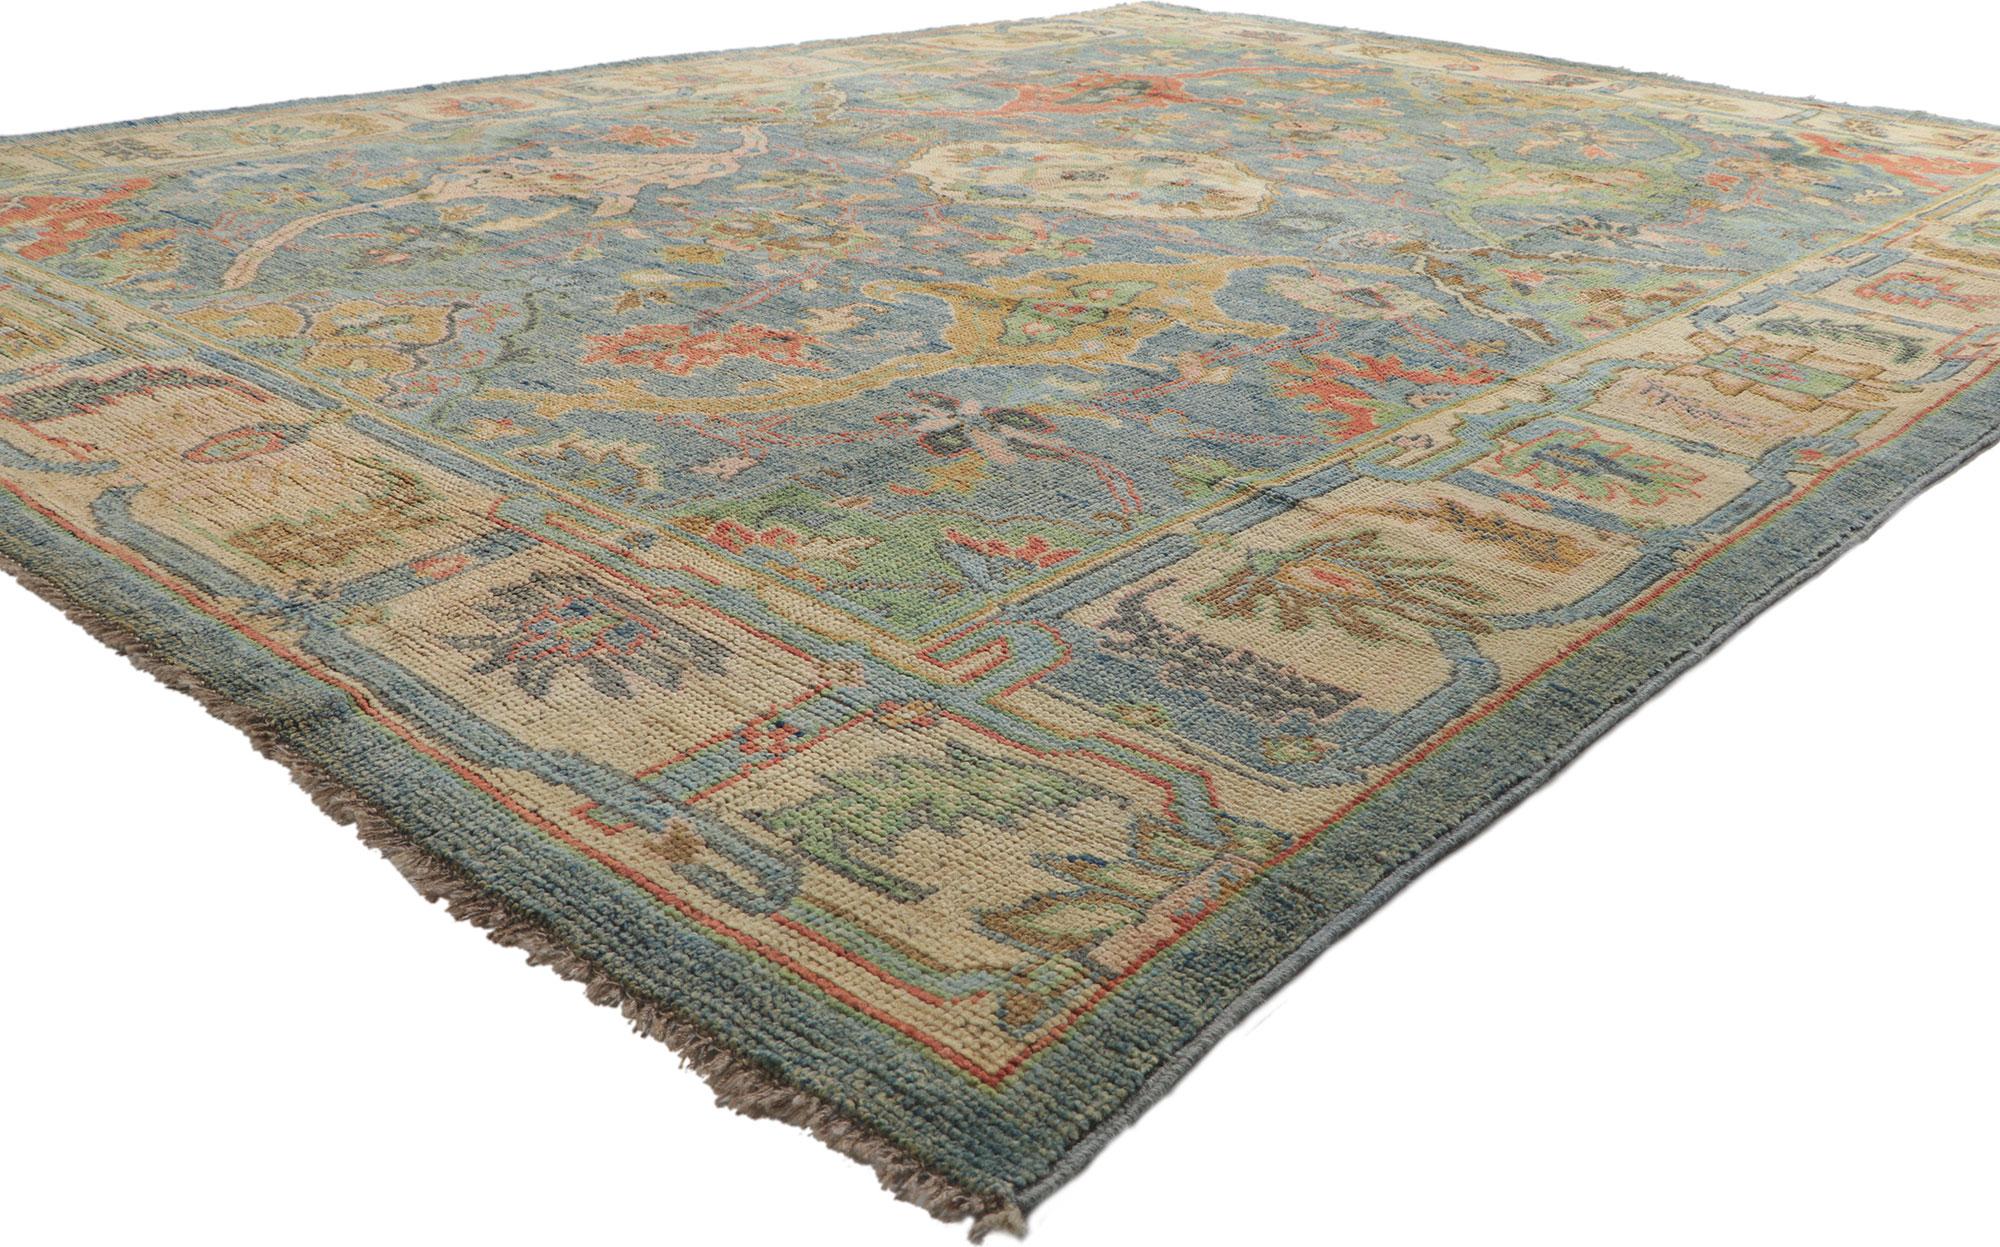 80729 Colorful Oushak Rug, 09'00 x 11'10.
Let yourself be whisked away on an enchanting journey, as you step onto this mesmerizing hand knotted wool colorful Oushak rug.​ This magical carpet ride will transport you to a colorful world of captivating